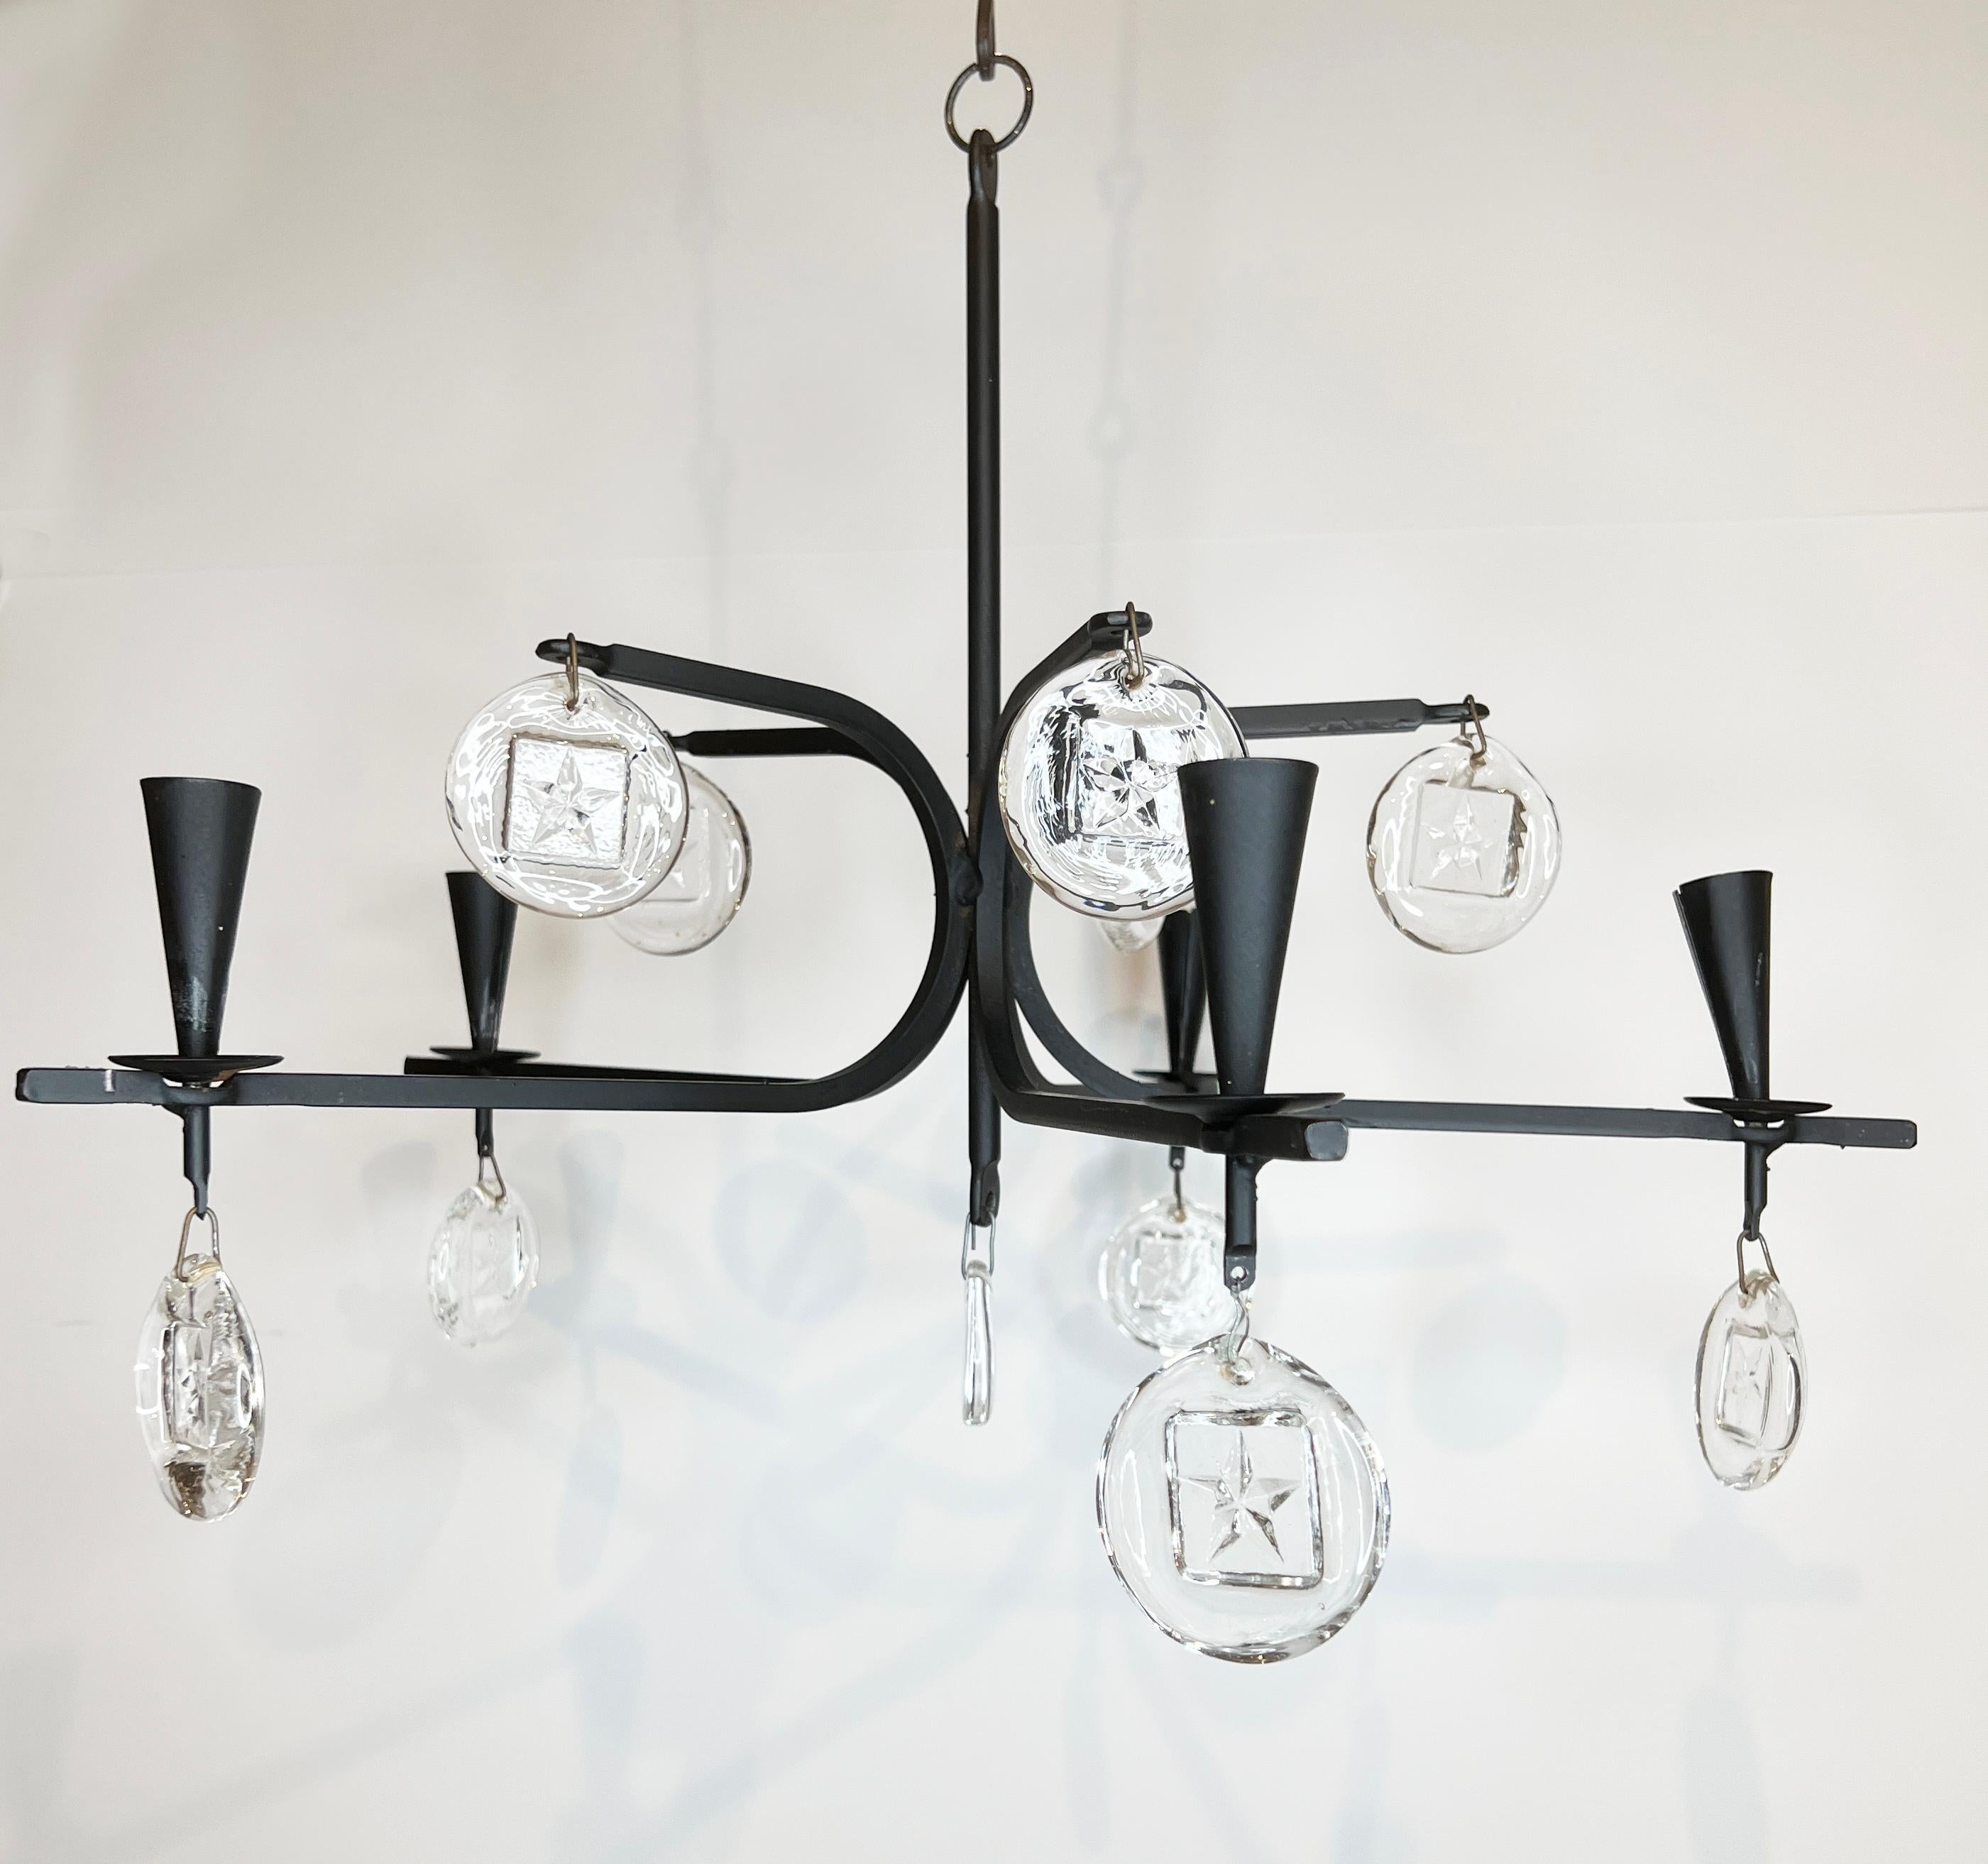 Petite Erik Hoglund Style Chandelier with 5 arms. Glass discs reflect light making it a distinctive option in a powder room or outdoor space.
The body of the chandelier measures 19″ Diameter by 14″ High. Then, there are 6 – 5″ extensions.
It is not